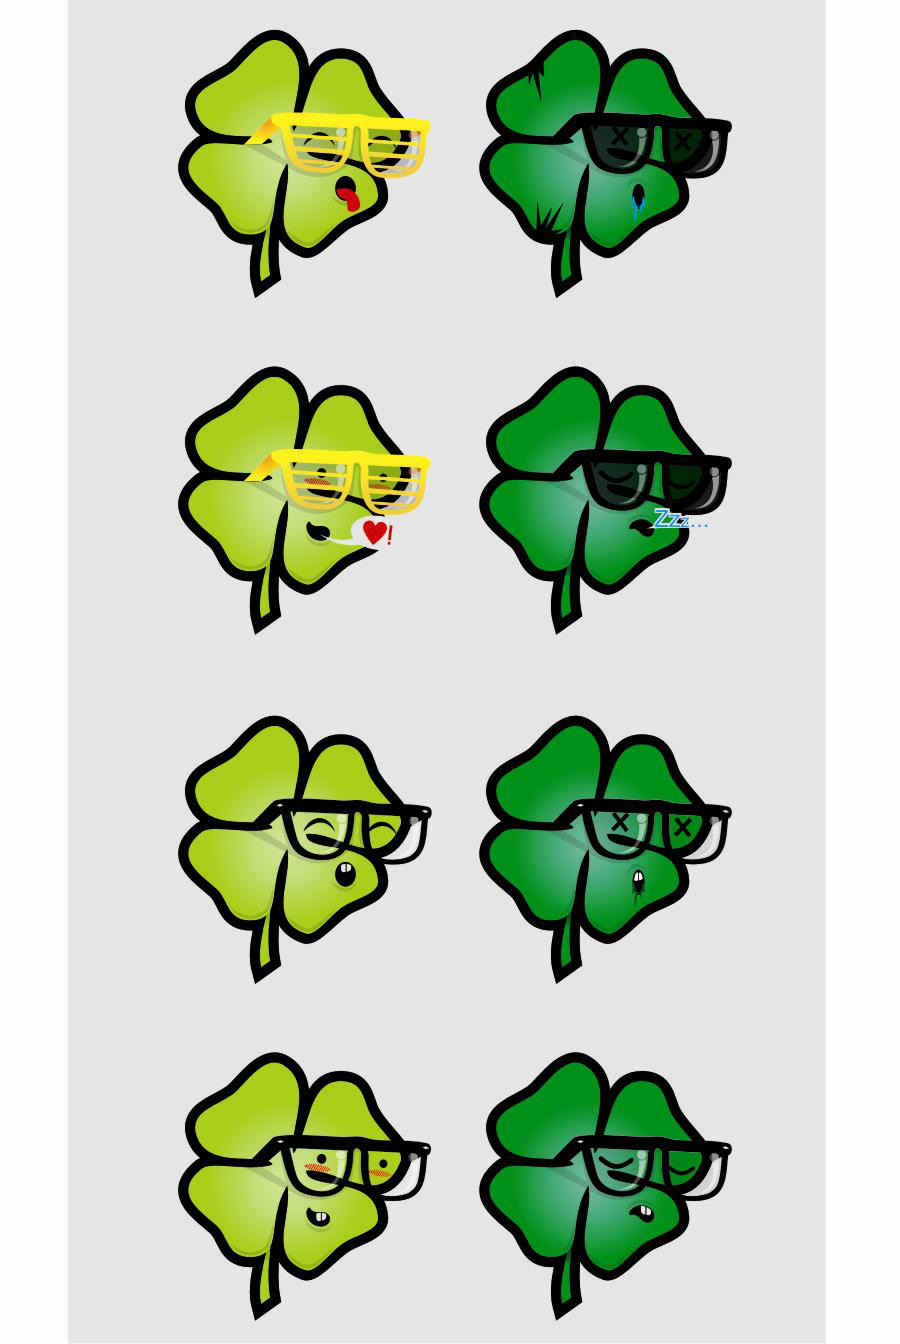 clover luck lucky face glass party style cartoon  personaje